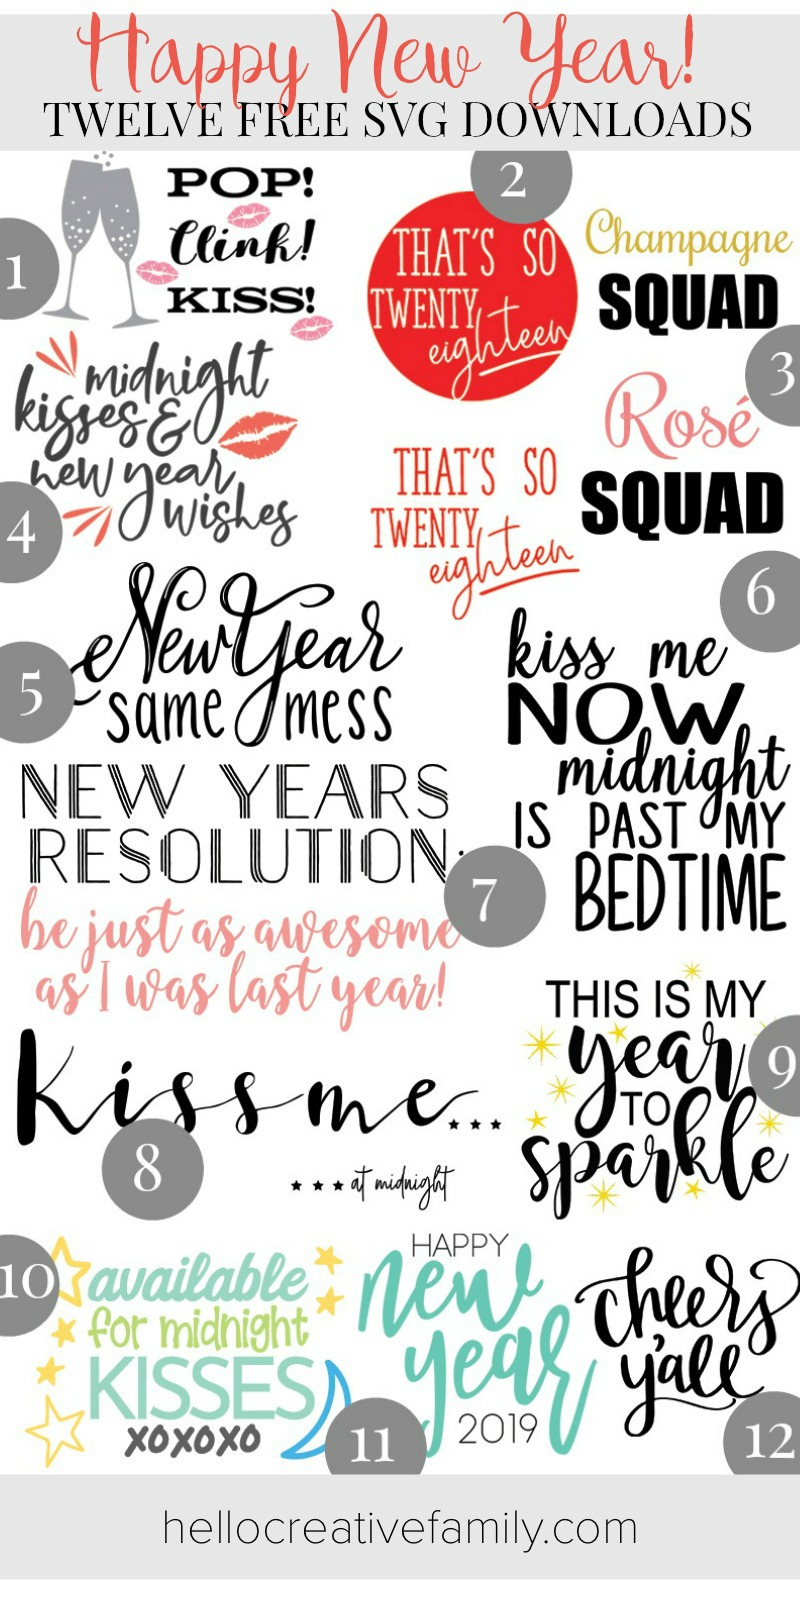  Pull out your Cricut or Silhouette and get crafting! We've teamed up with 11 of our favorite craft and DIY bloggers and are sharing 12 free New Year's Eve SVG Files! Perfect for creating handmade clothing, wine glasses, and party decorations for December 31st! #Cricut #Silhouette #SVGFiles #FreeSVG #NewYearsEve